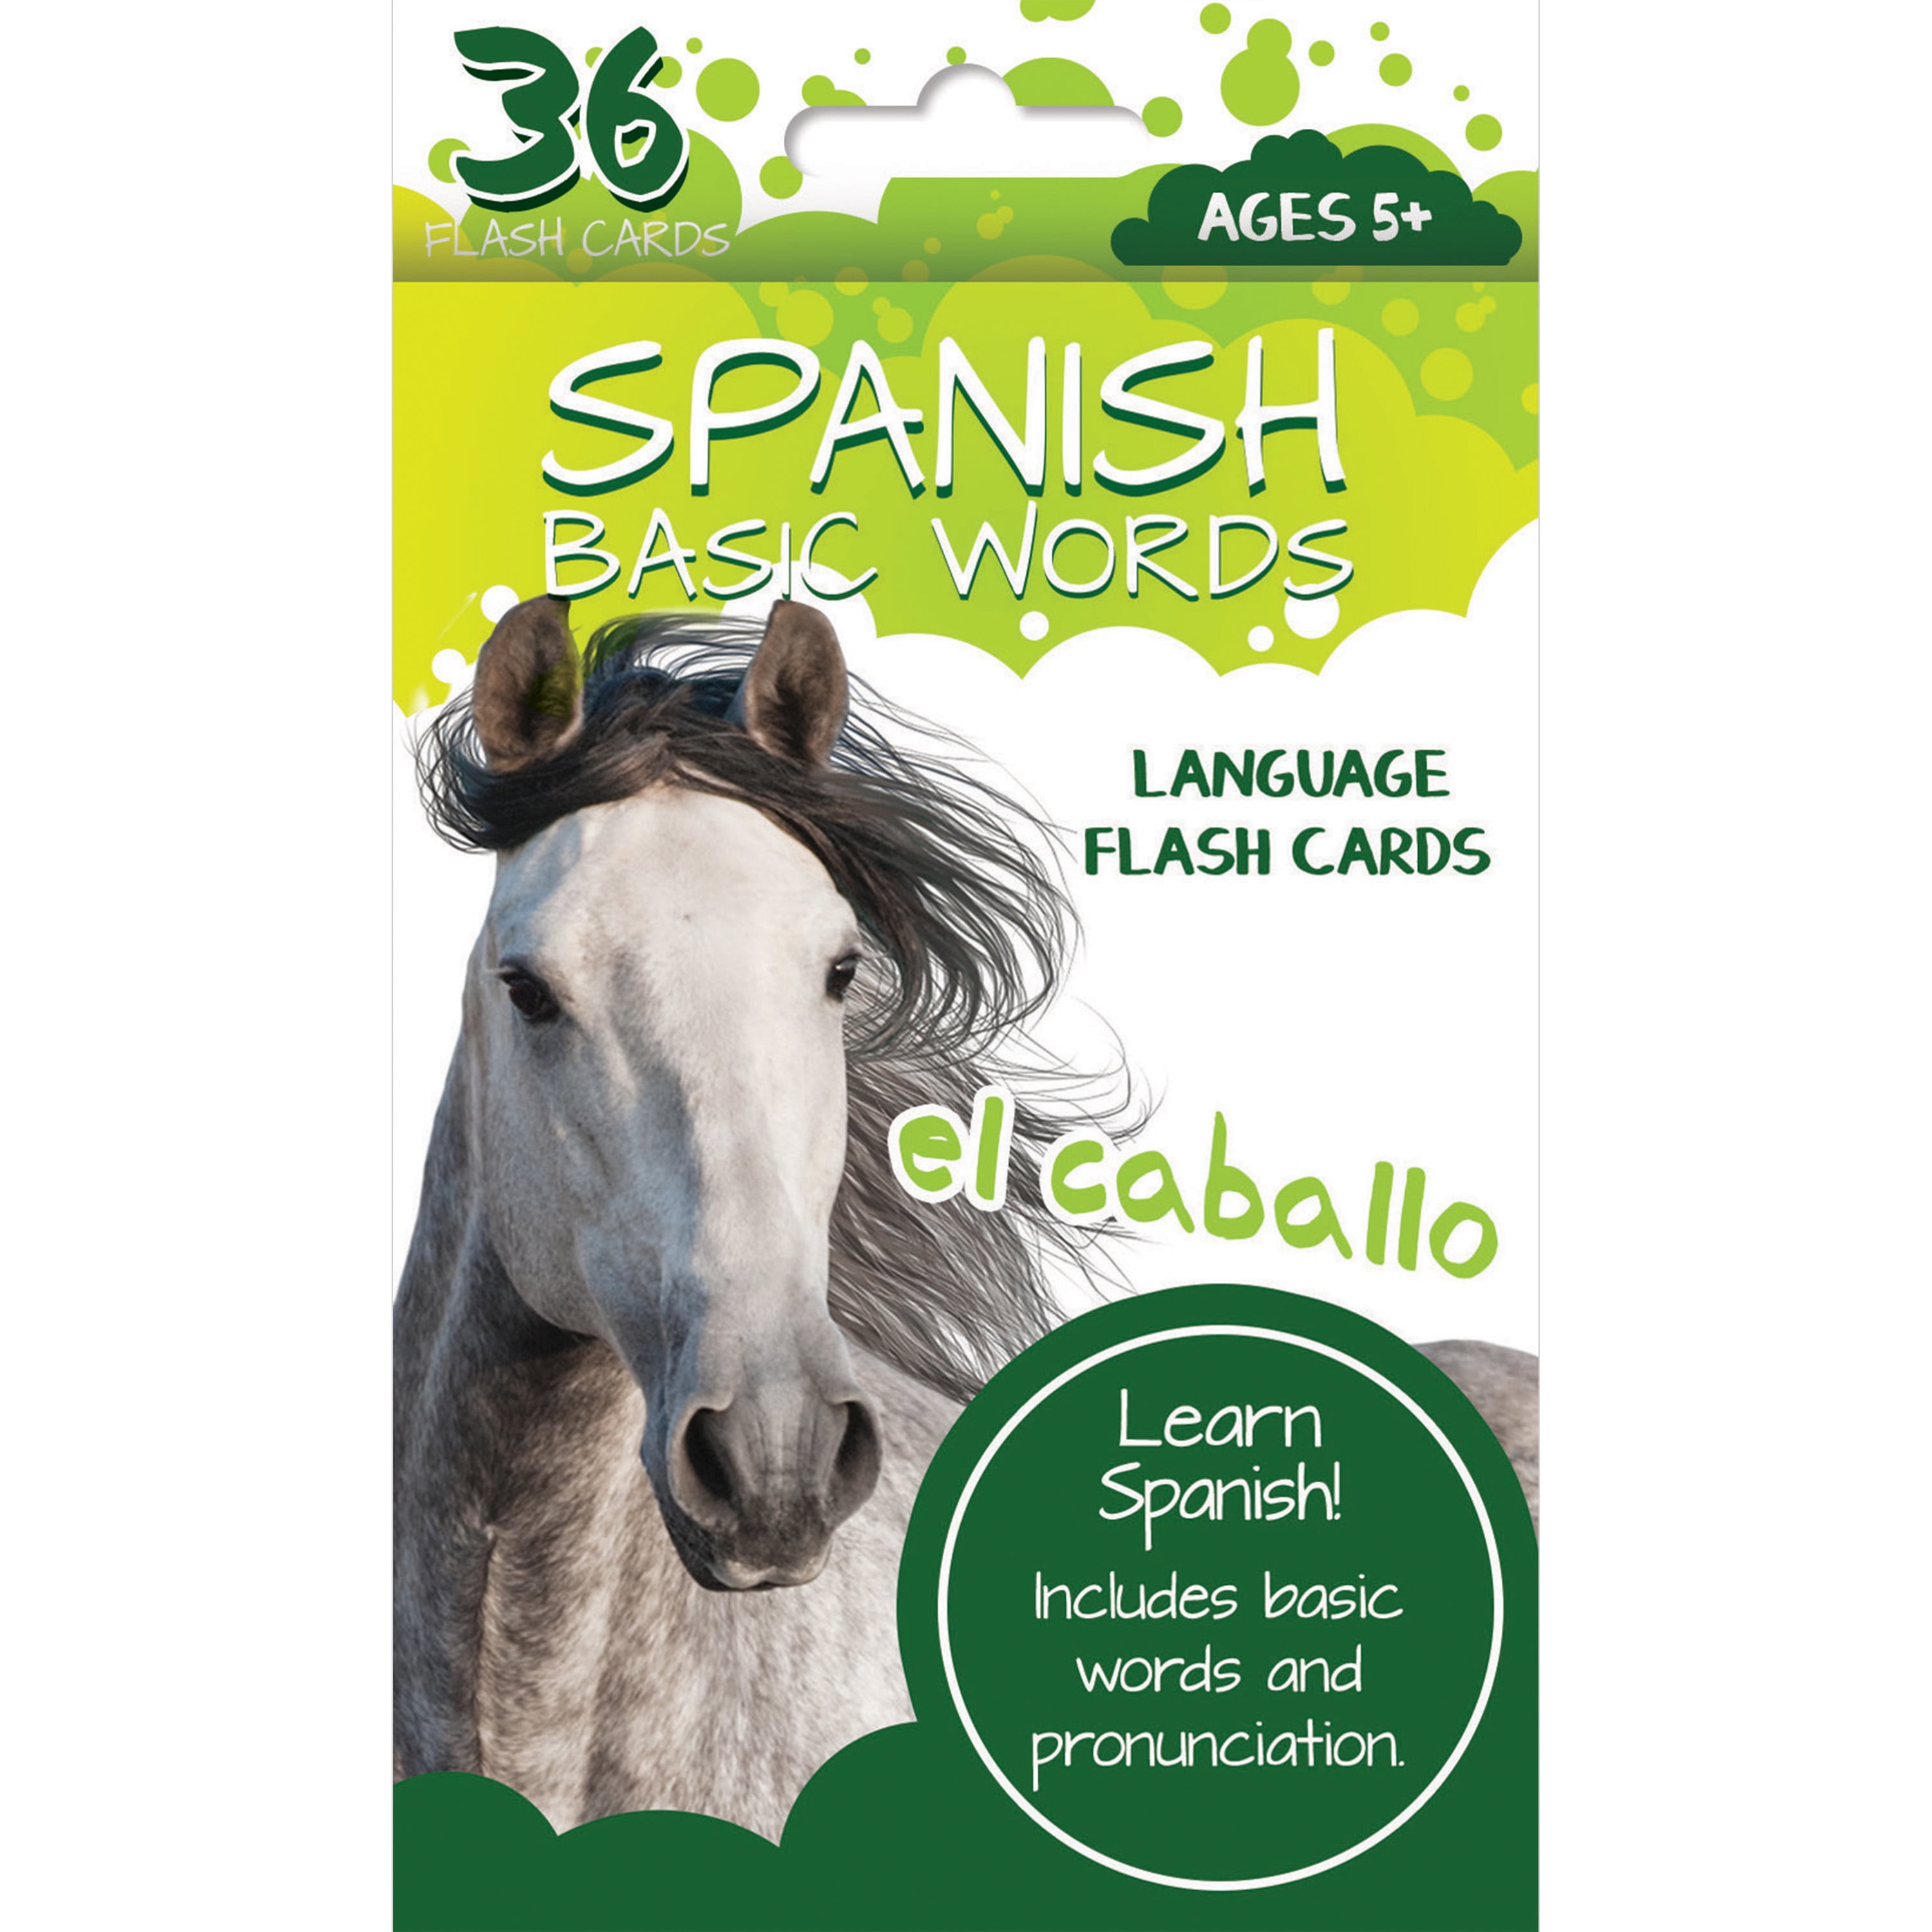 Bendon Spanish Flash Cards, 36 Count